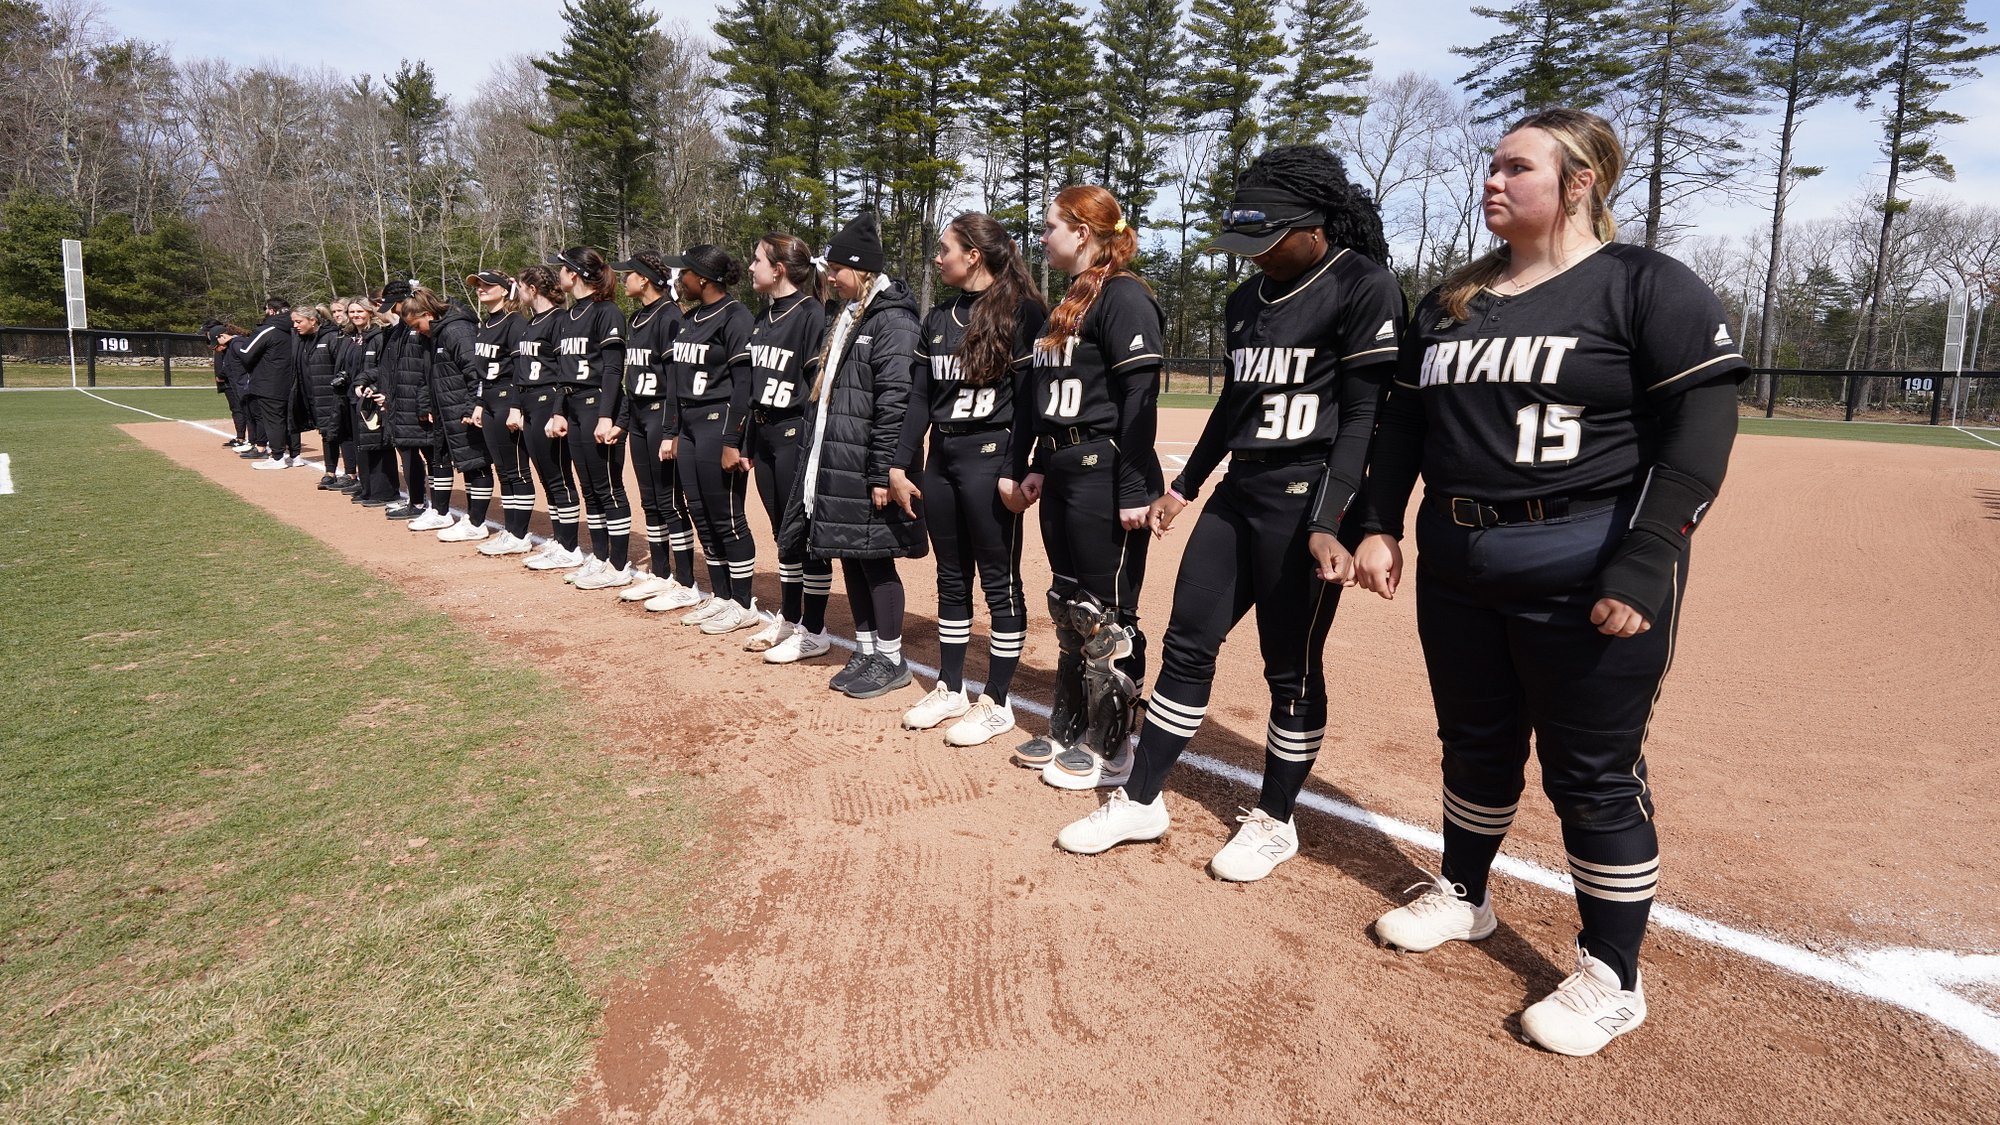 Bryant welcomes Stonehill to Conaty Park for Tuesday DH